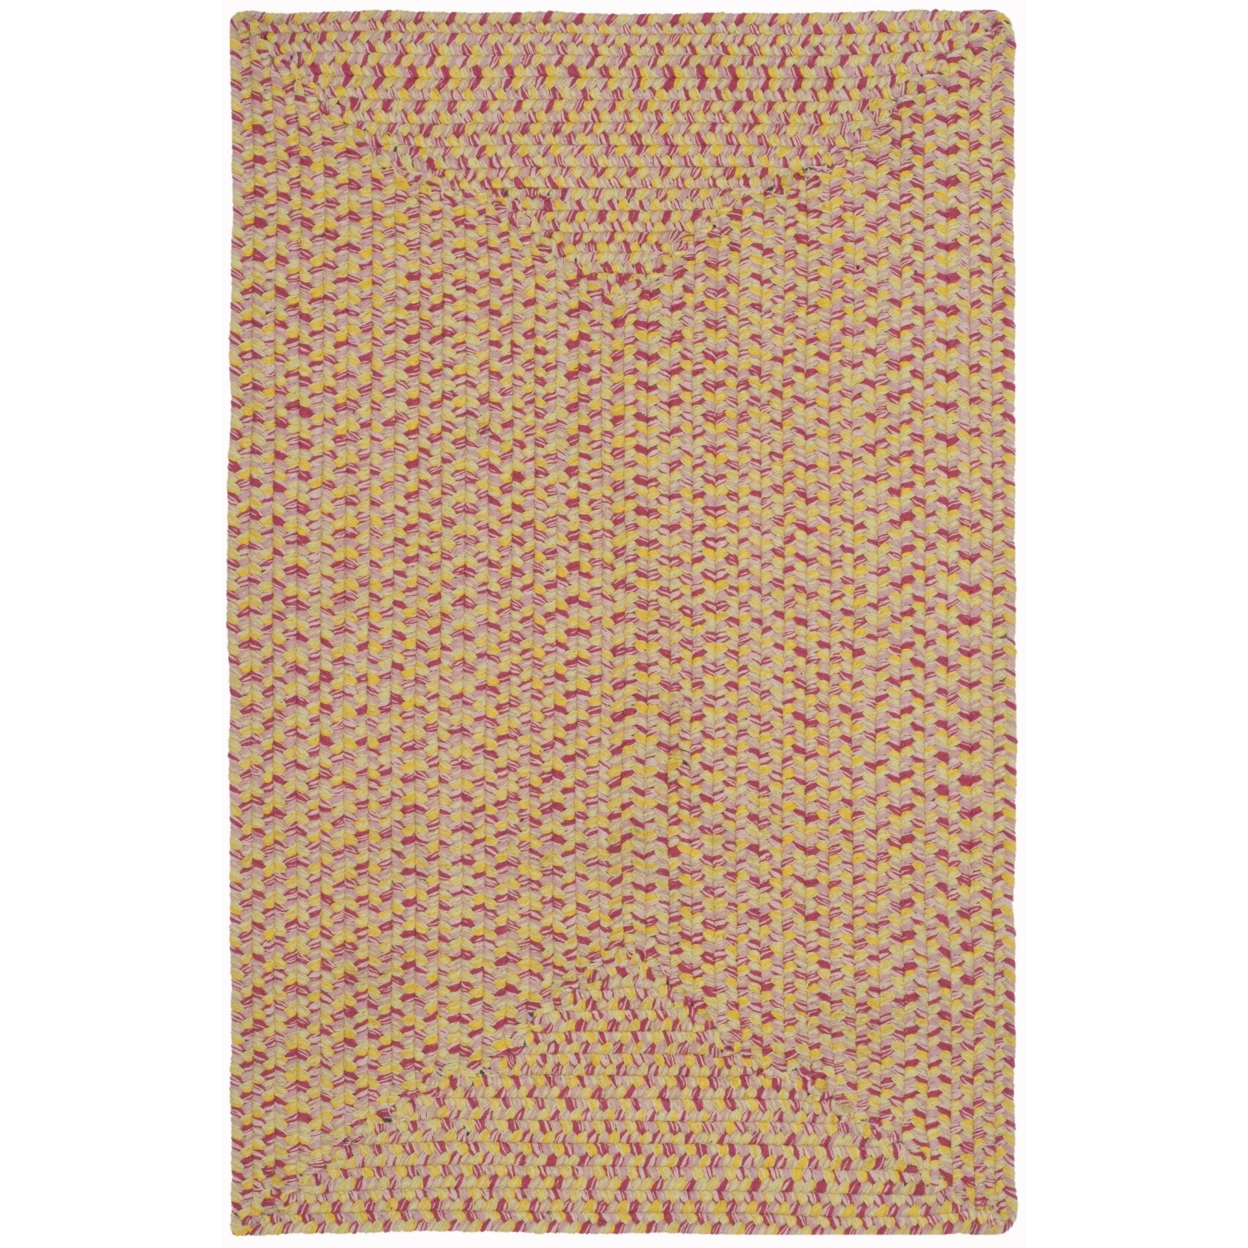 SAFAVIEH Braided Collection BRD164A Handwoven Multi Rug - 6' Square